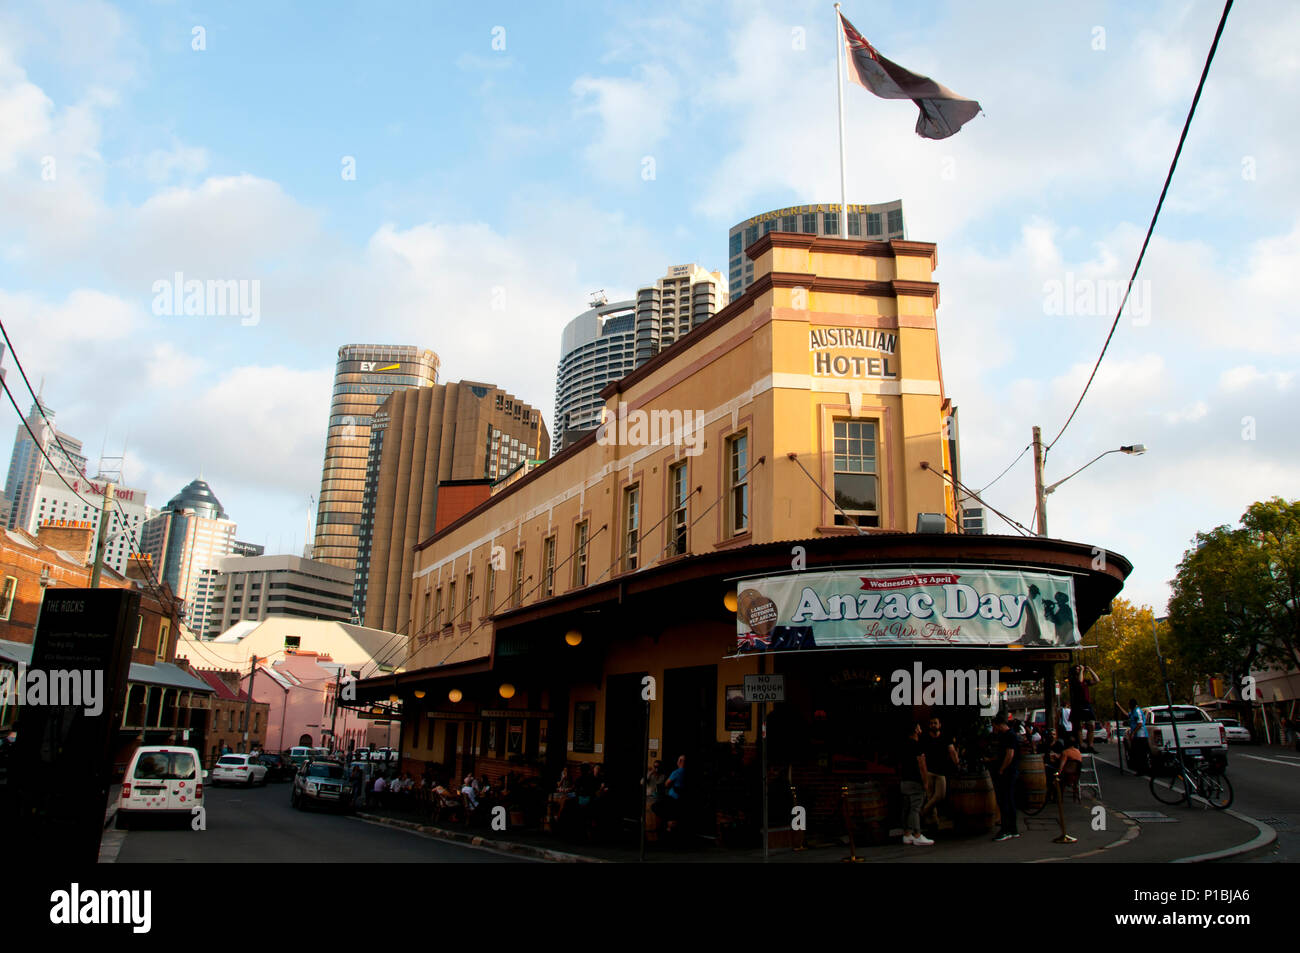 SYDNEY, AUSTRALIA - April 6, 2018: The Australian Heritage Hotel located on corner of Gloucester St & Cumberland St in "The Rocks" district of Stock Photo - Alamy